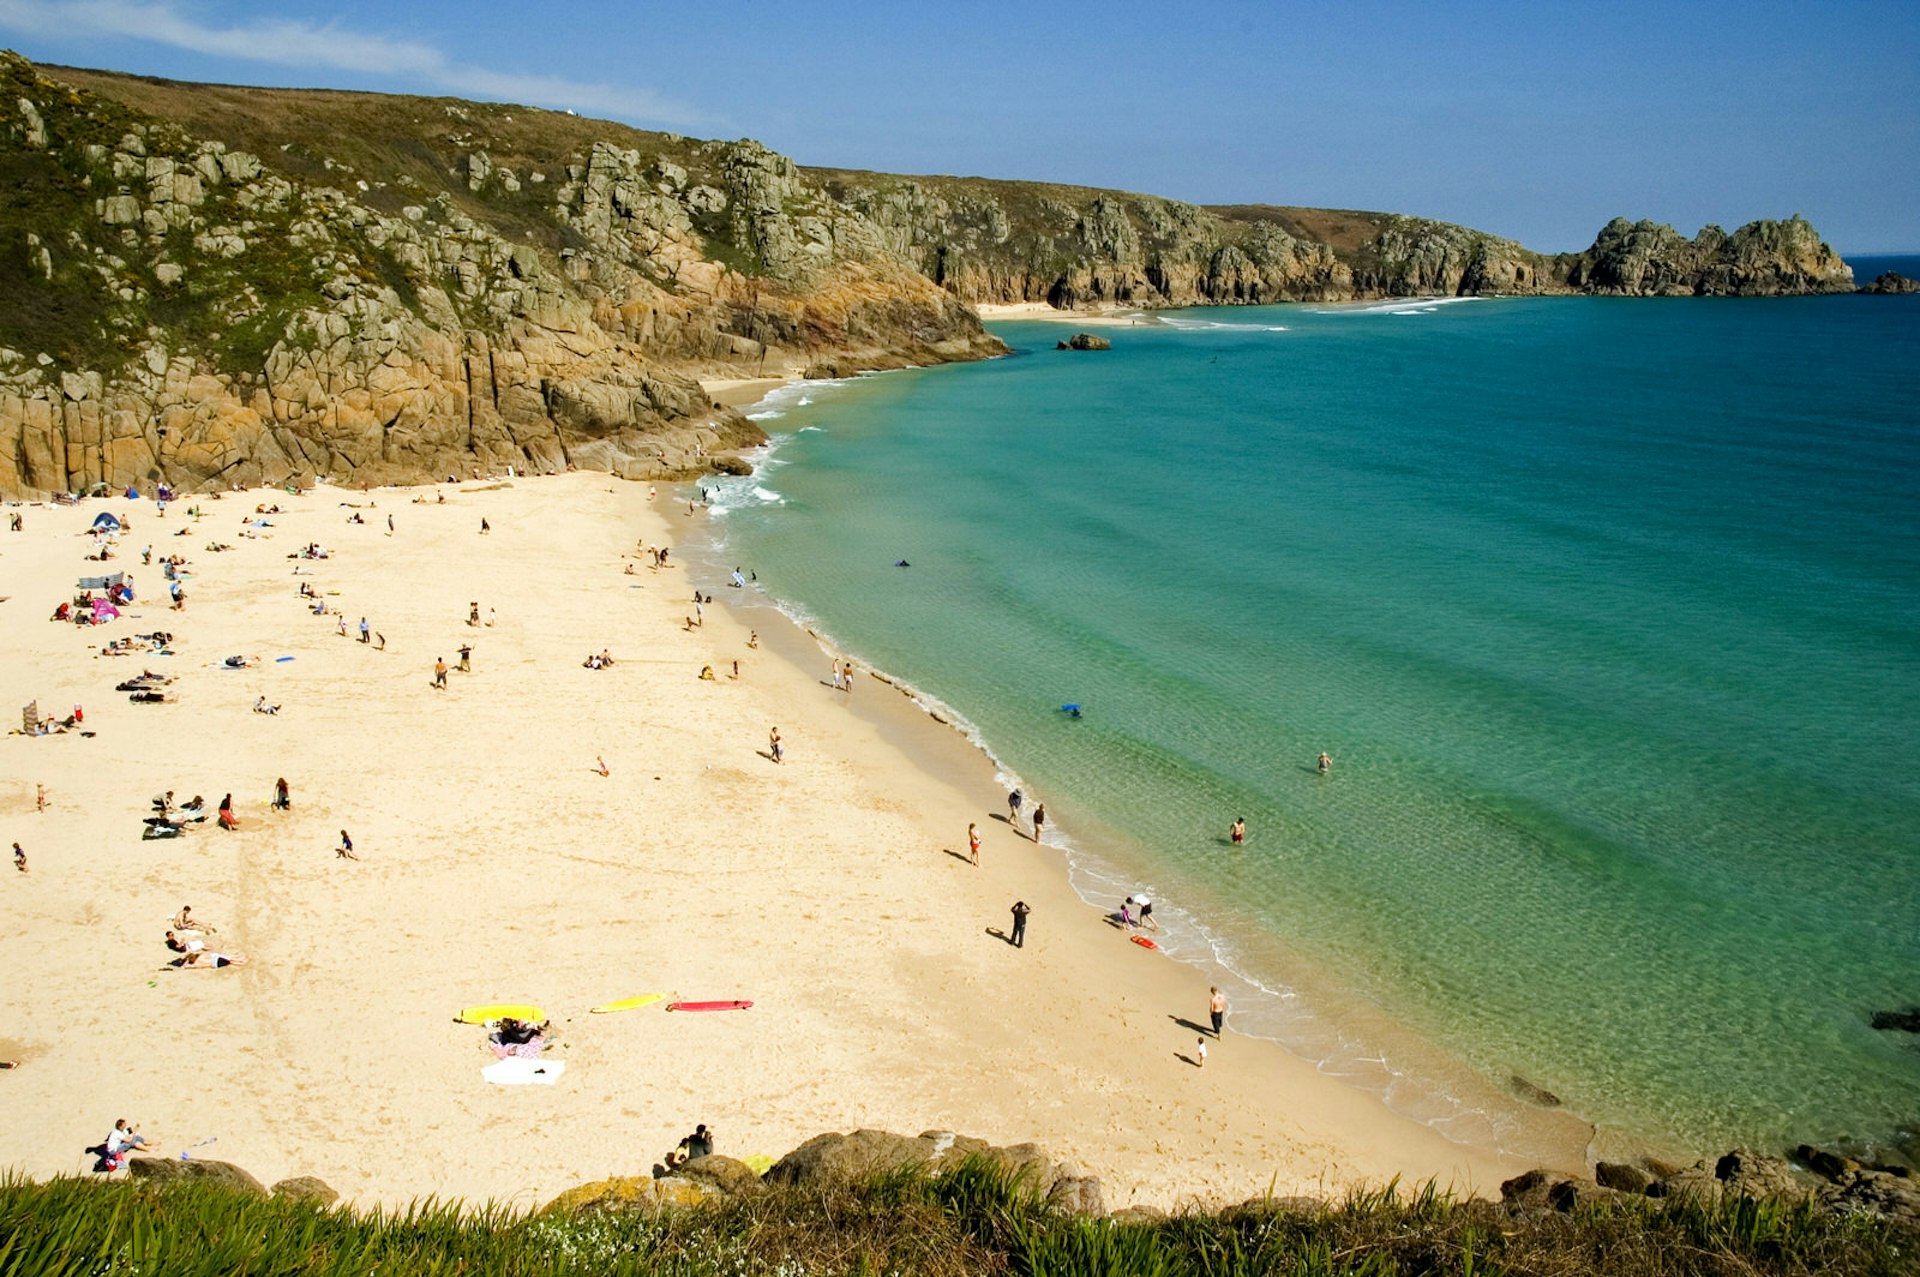 Its white sands backed by rugged cliffs, Porthcurno is just one of the stunning Cornish locations showcased in Poldark © Antclausen / Getty Images